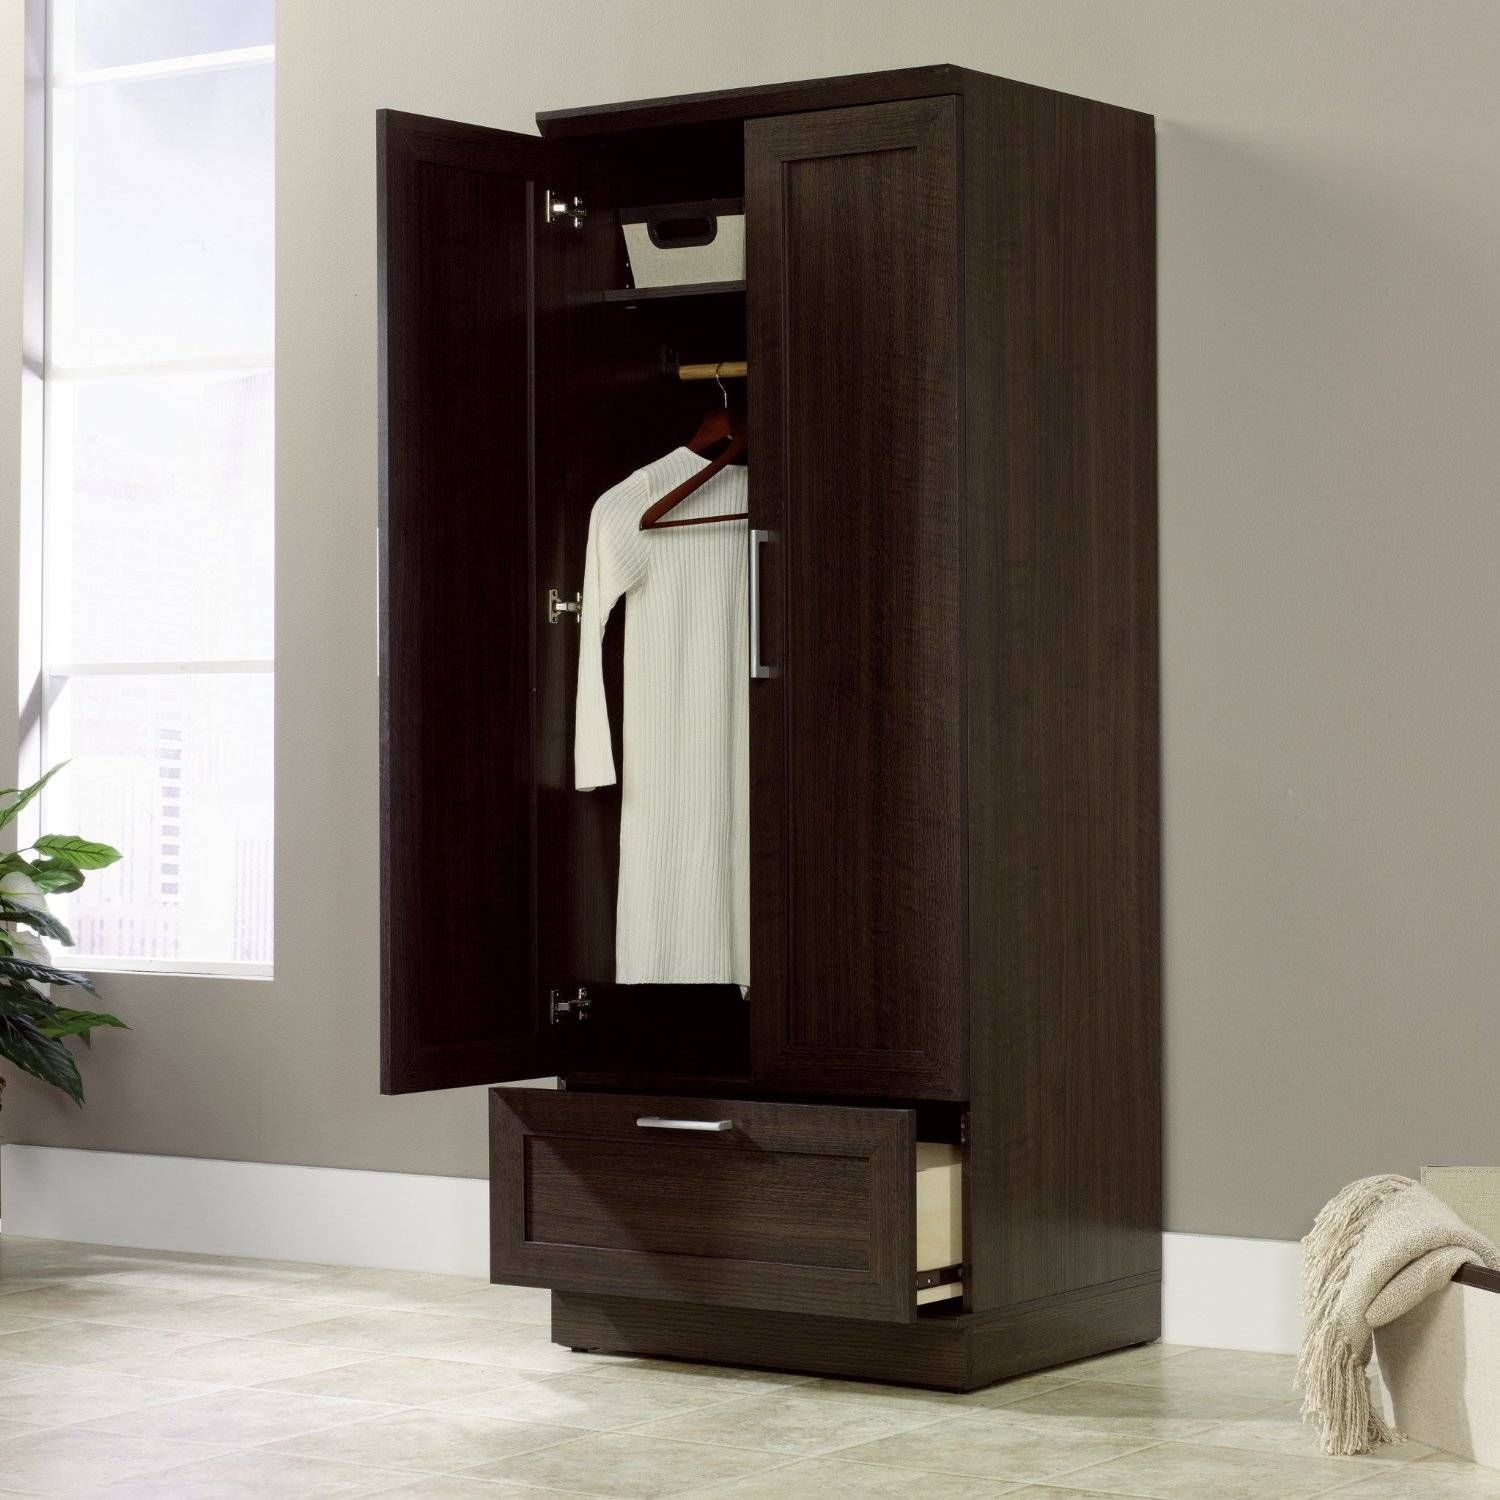 Wardrobe : Dark Wood Fitted Wardrobe Painting A Dark Wood Wardrobe Inside Dark Wood Wardrobes Armoires (Photo 4 of 30)